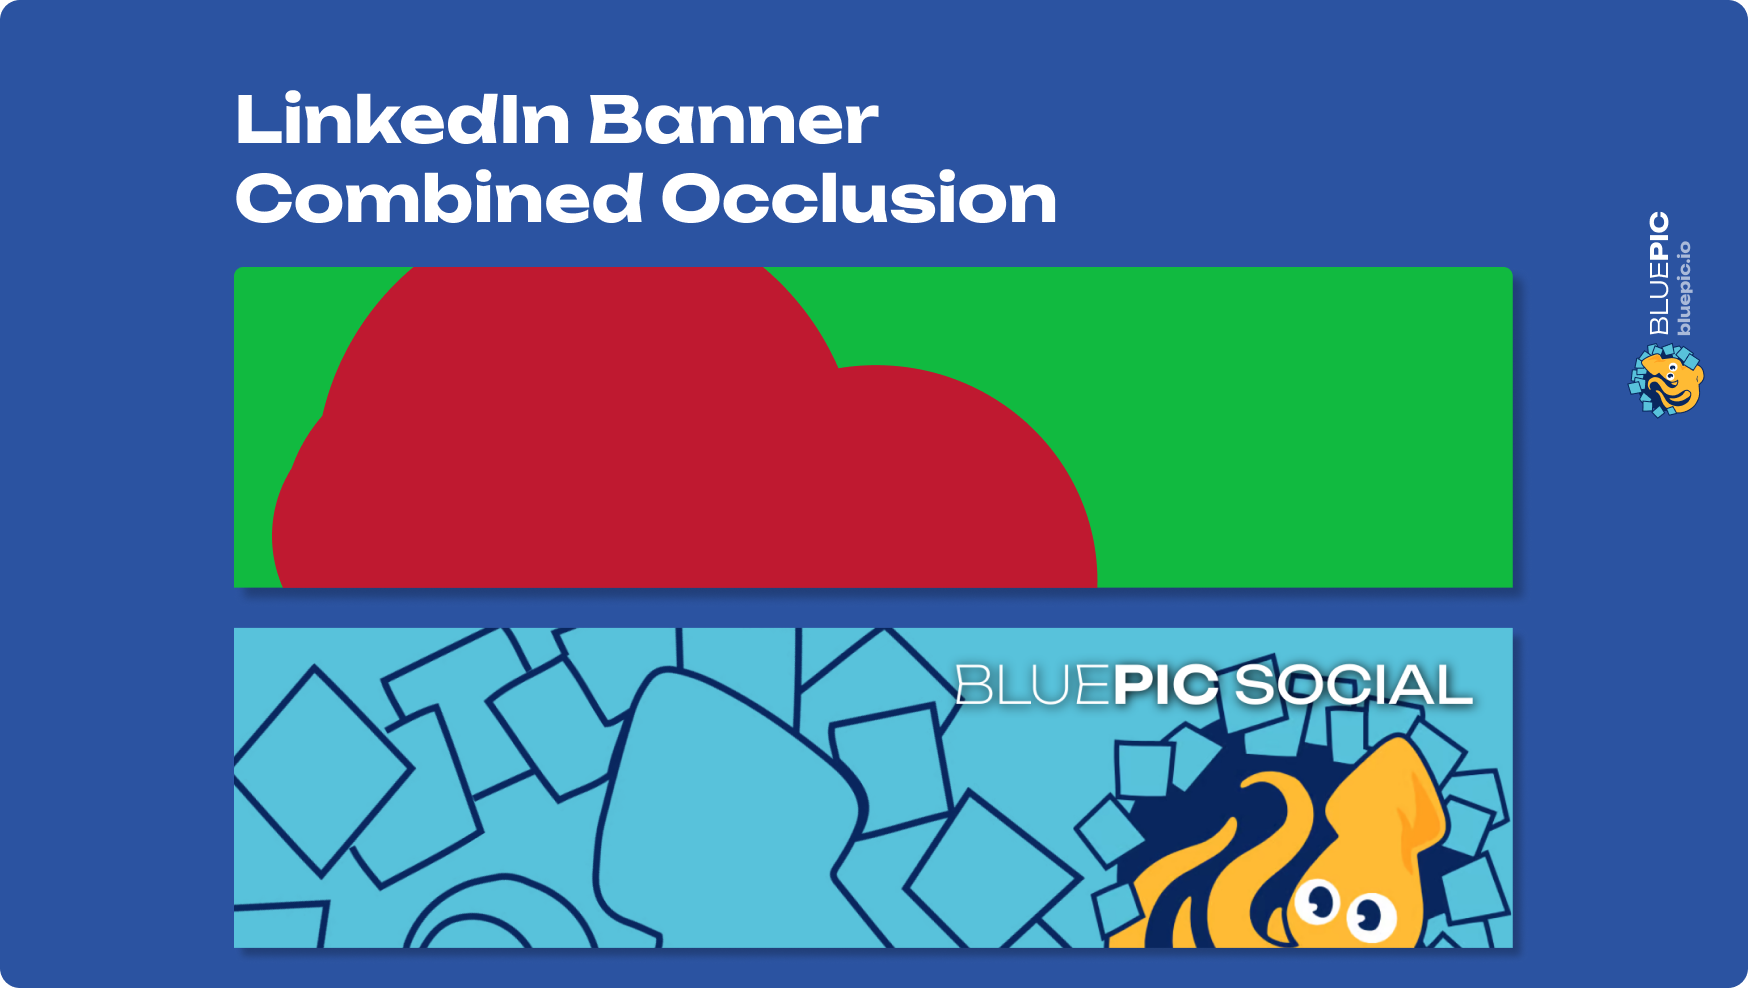 Graphic combining all possible occluded spaces with a red (cloud-like) shape marking the occlusion zone and example banner avoiding important information in the occlusion area